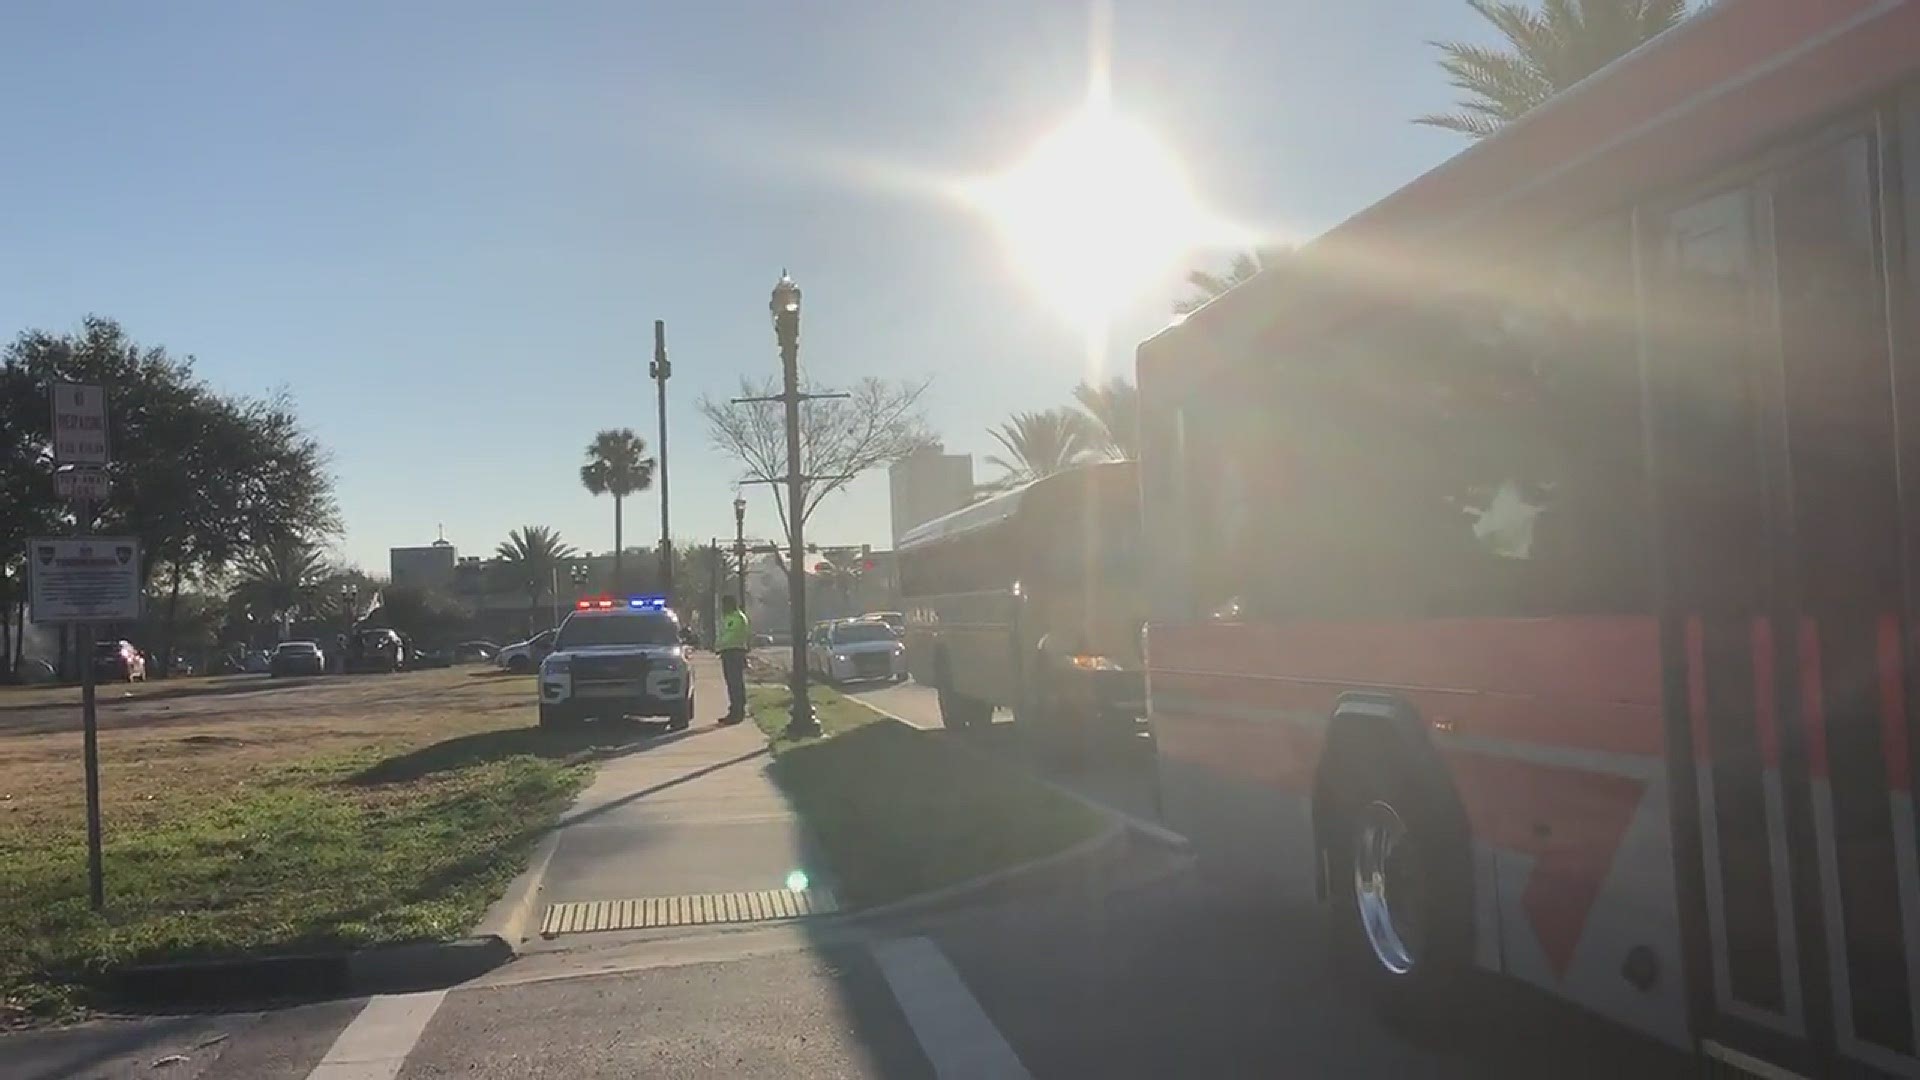 A JSO officer on scene says there was a minor accident where a school bus and JEA bus clipped mirrors.
Credit: Renata Di Gregorio